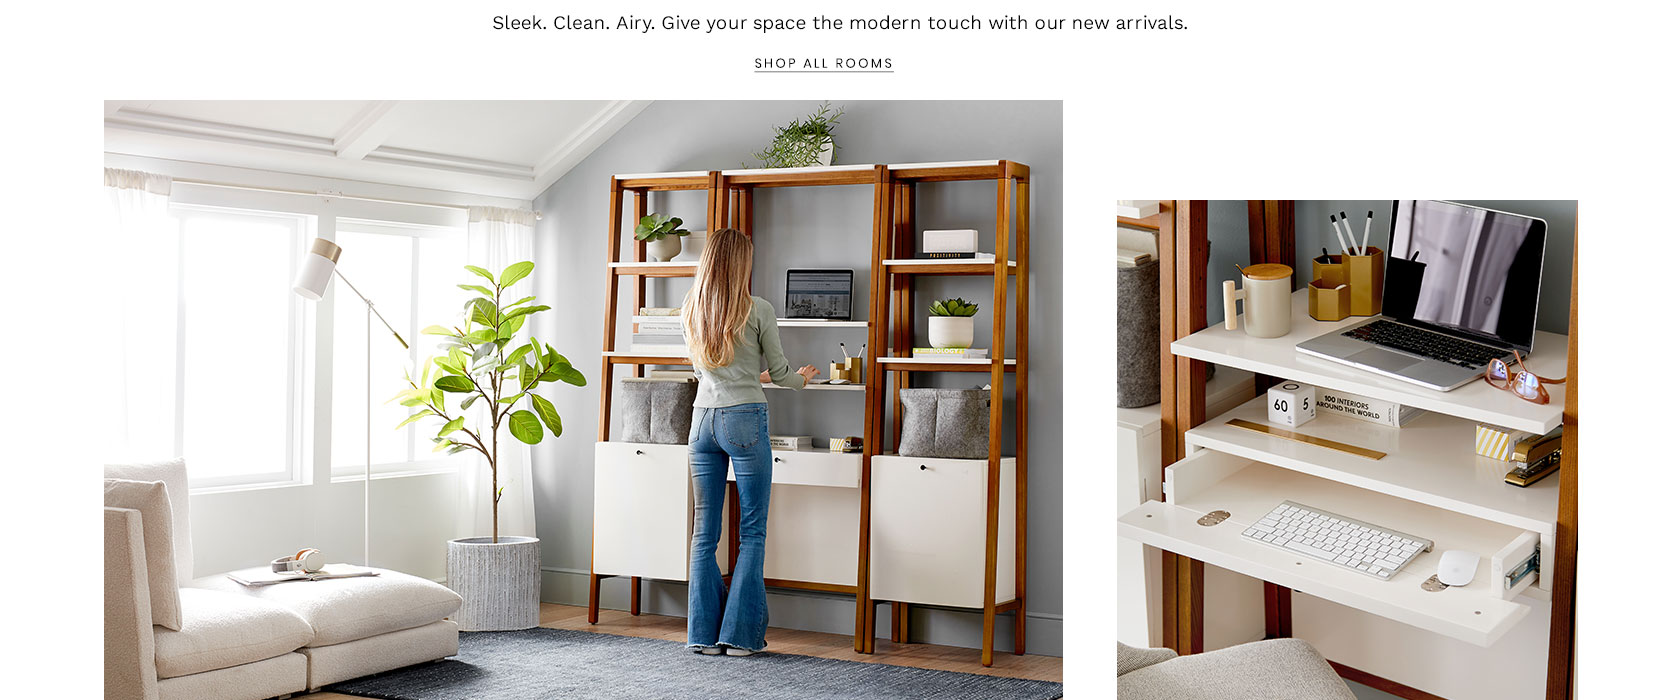 Sleek. Clean. Airy. Give your space the modern touch with our new arrivals. Shop All Rooms